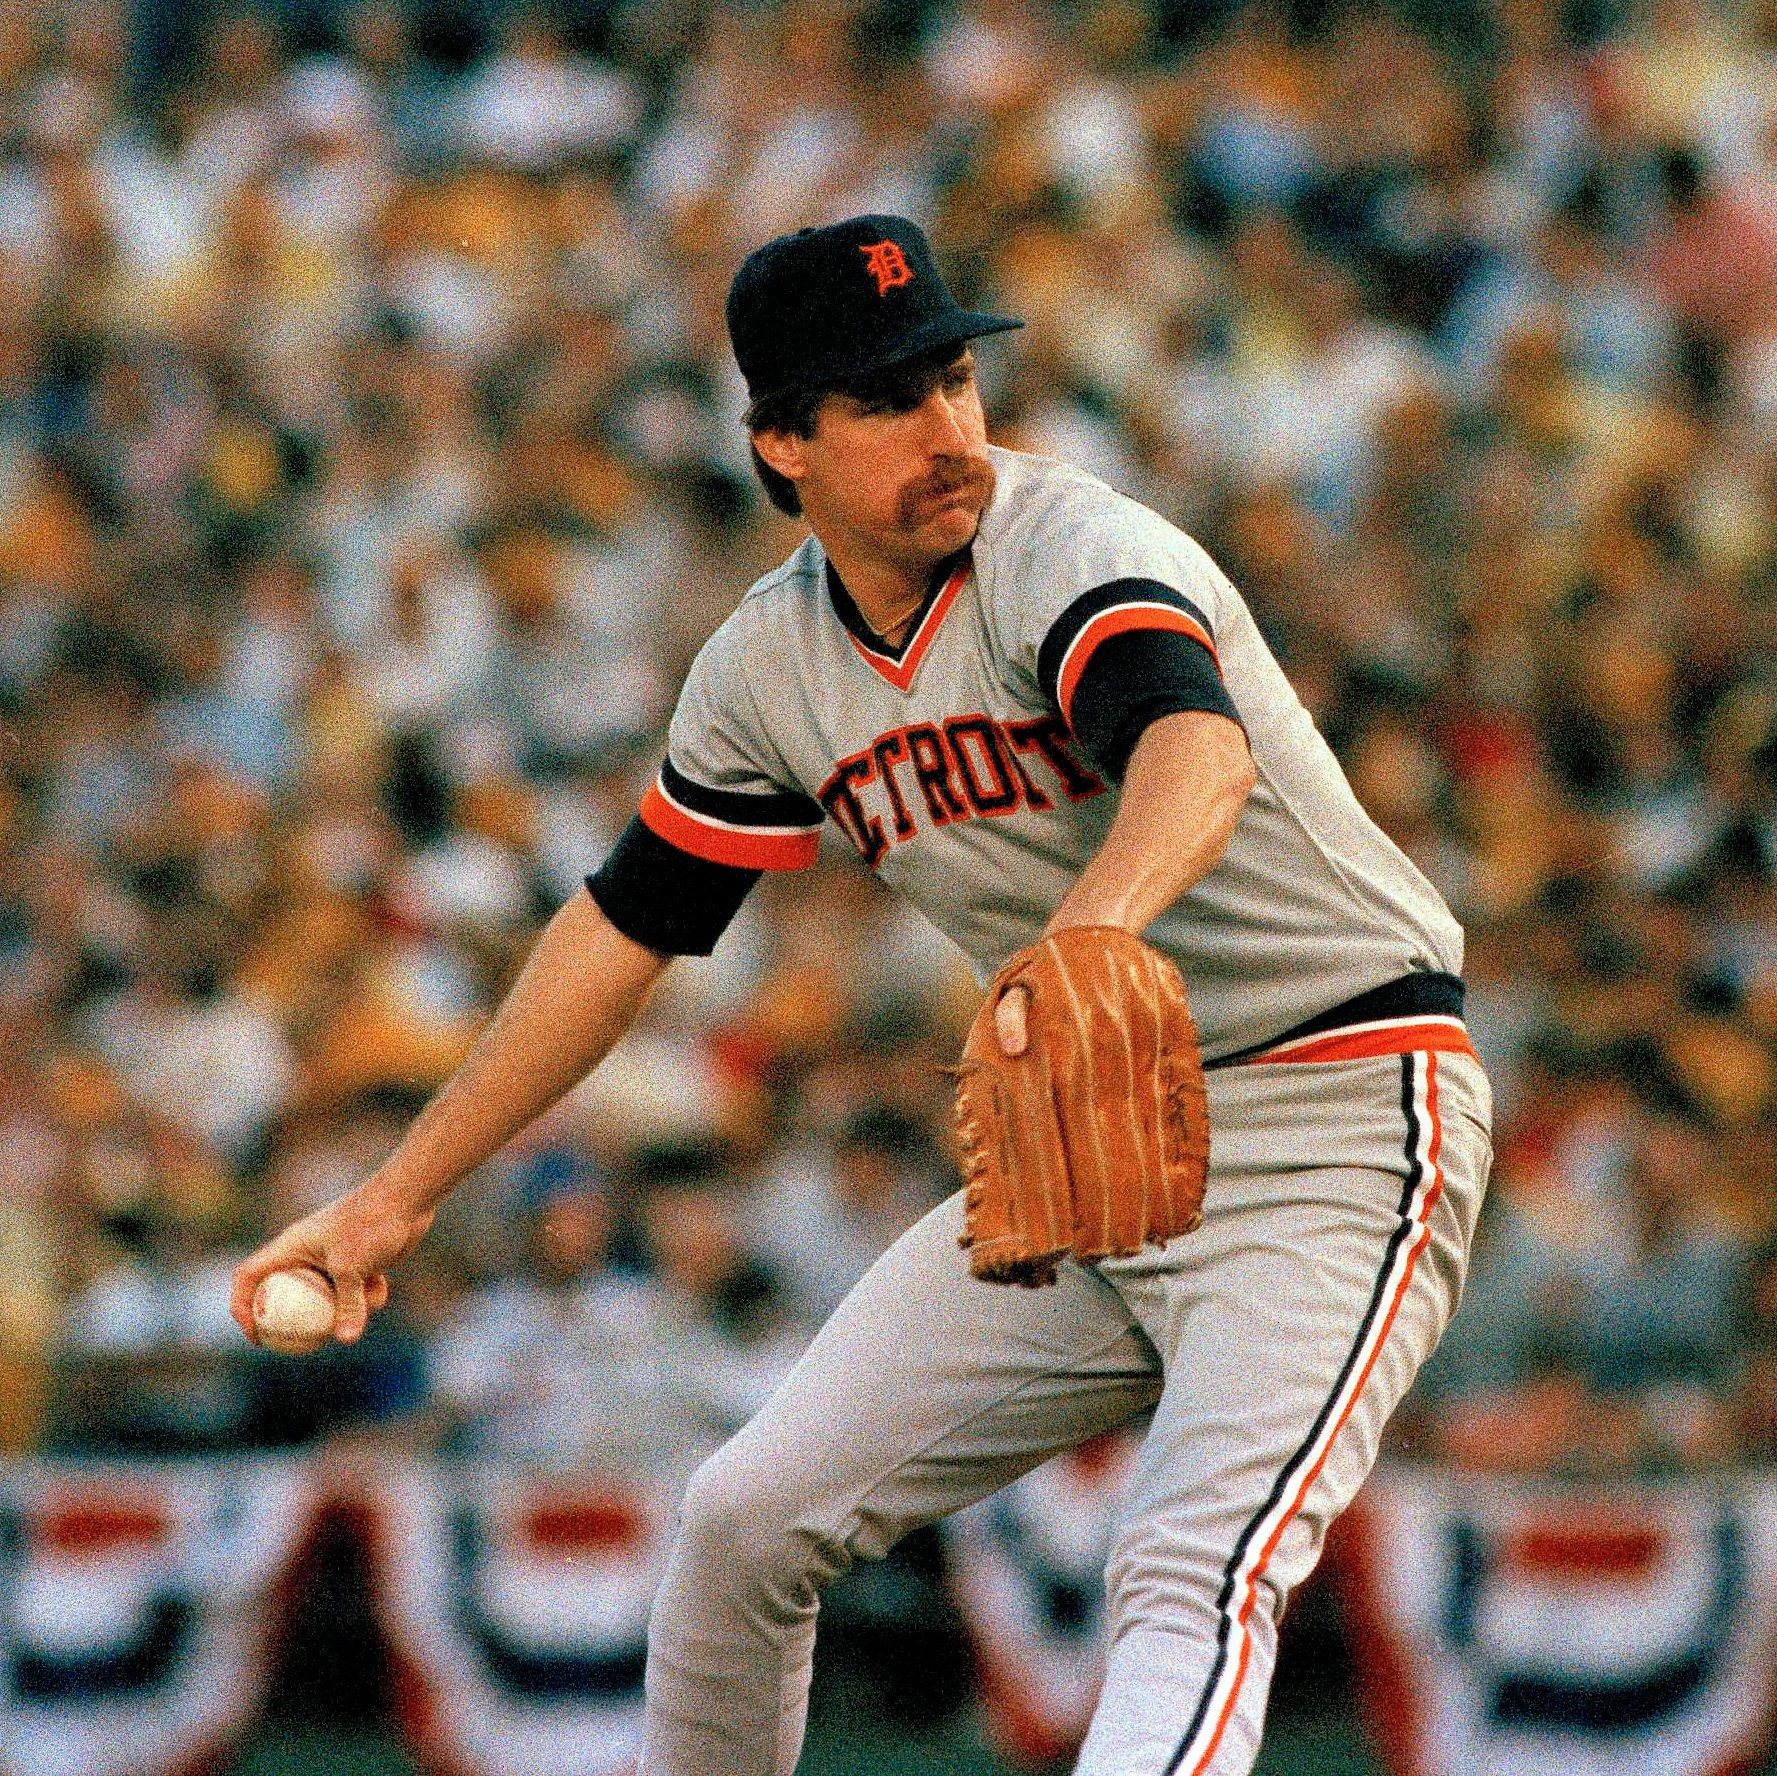 Jack Morris playing for the Detroit Tigers back in the day